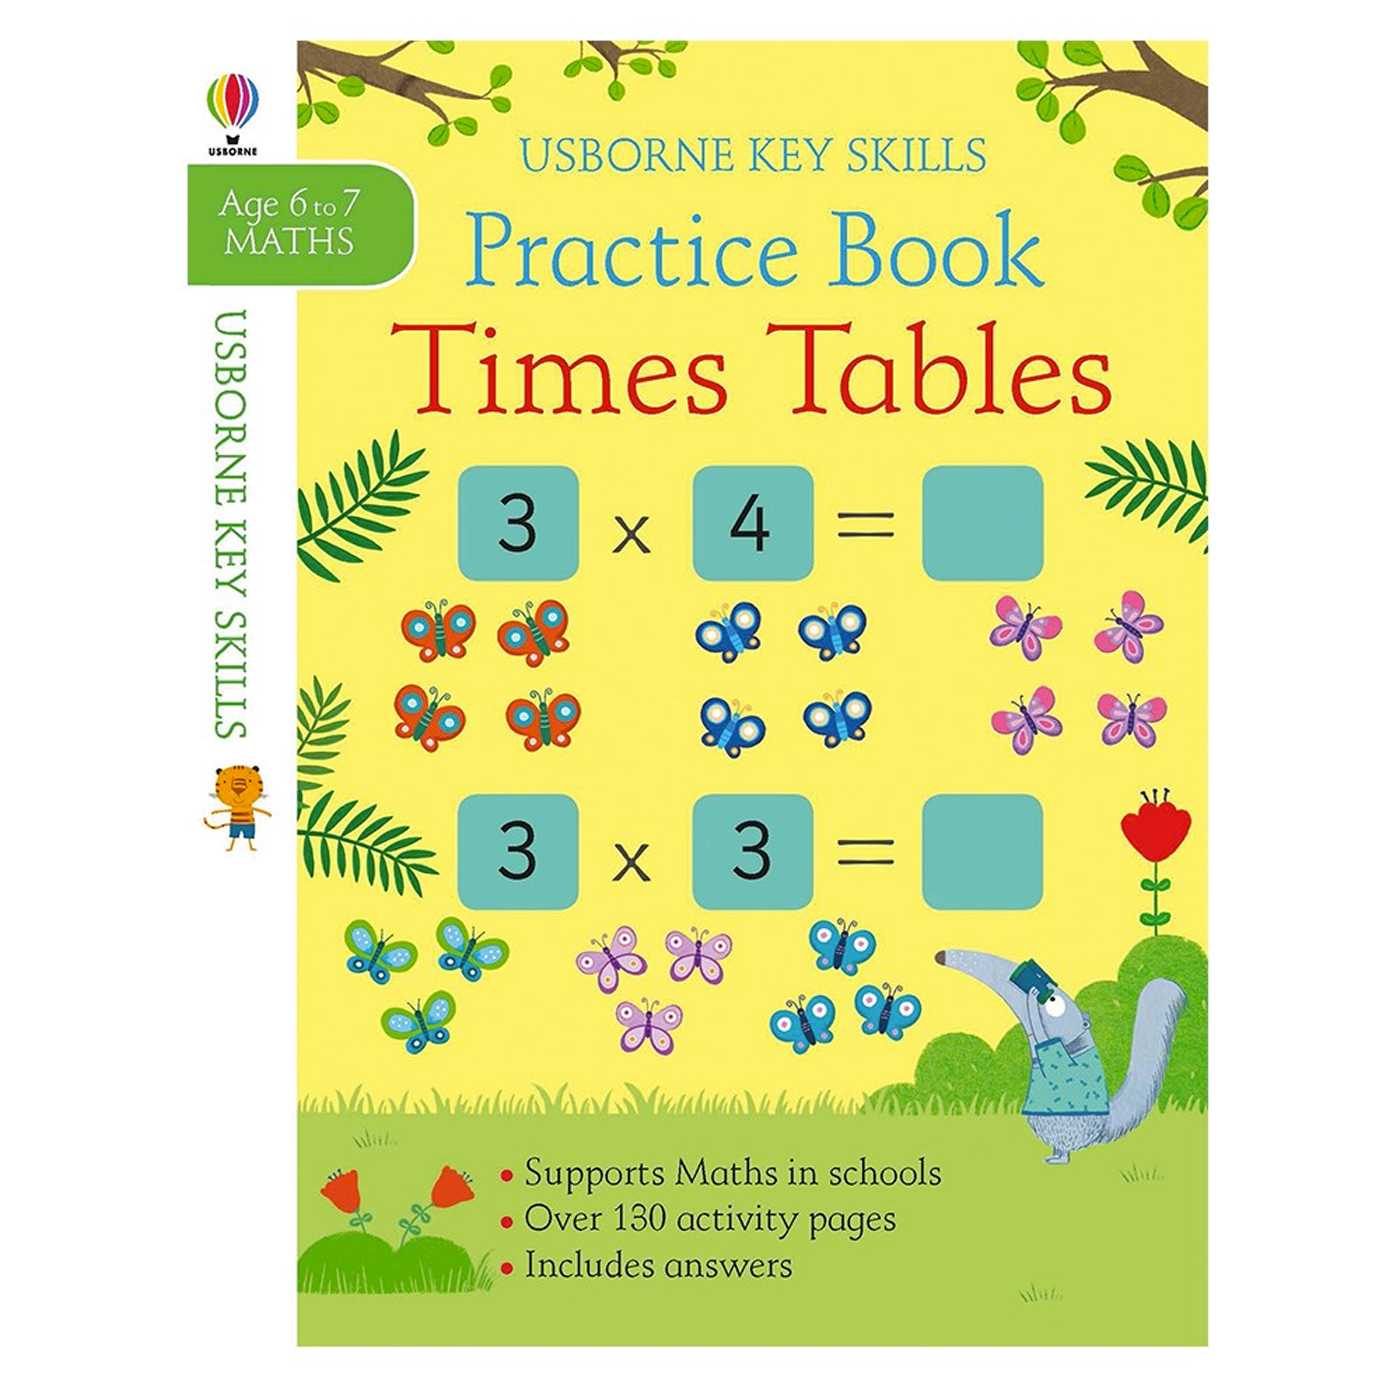  Key Skills Times Tables Practice Book 6-7